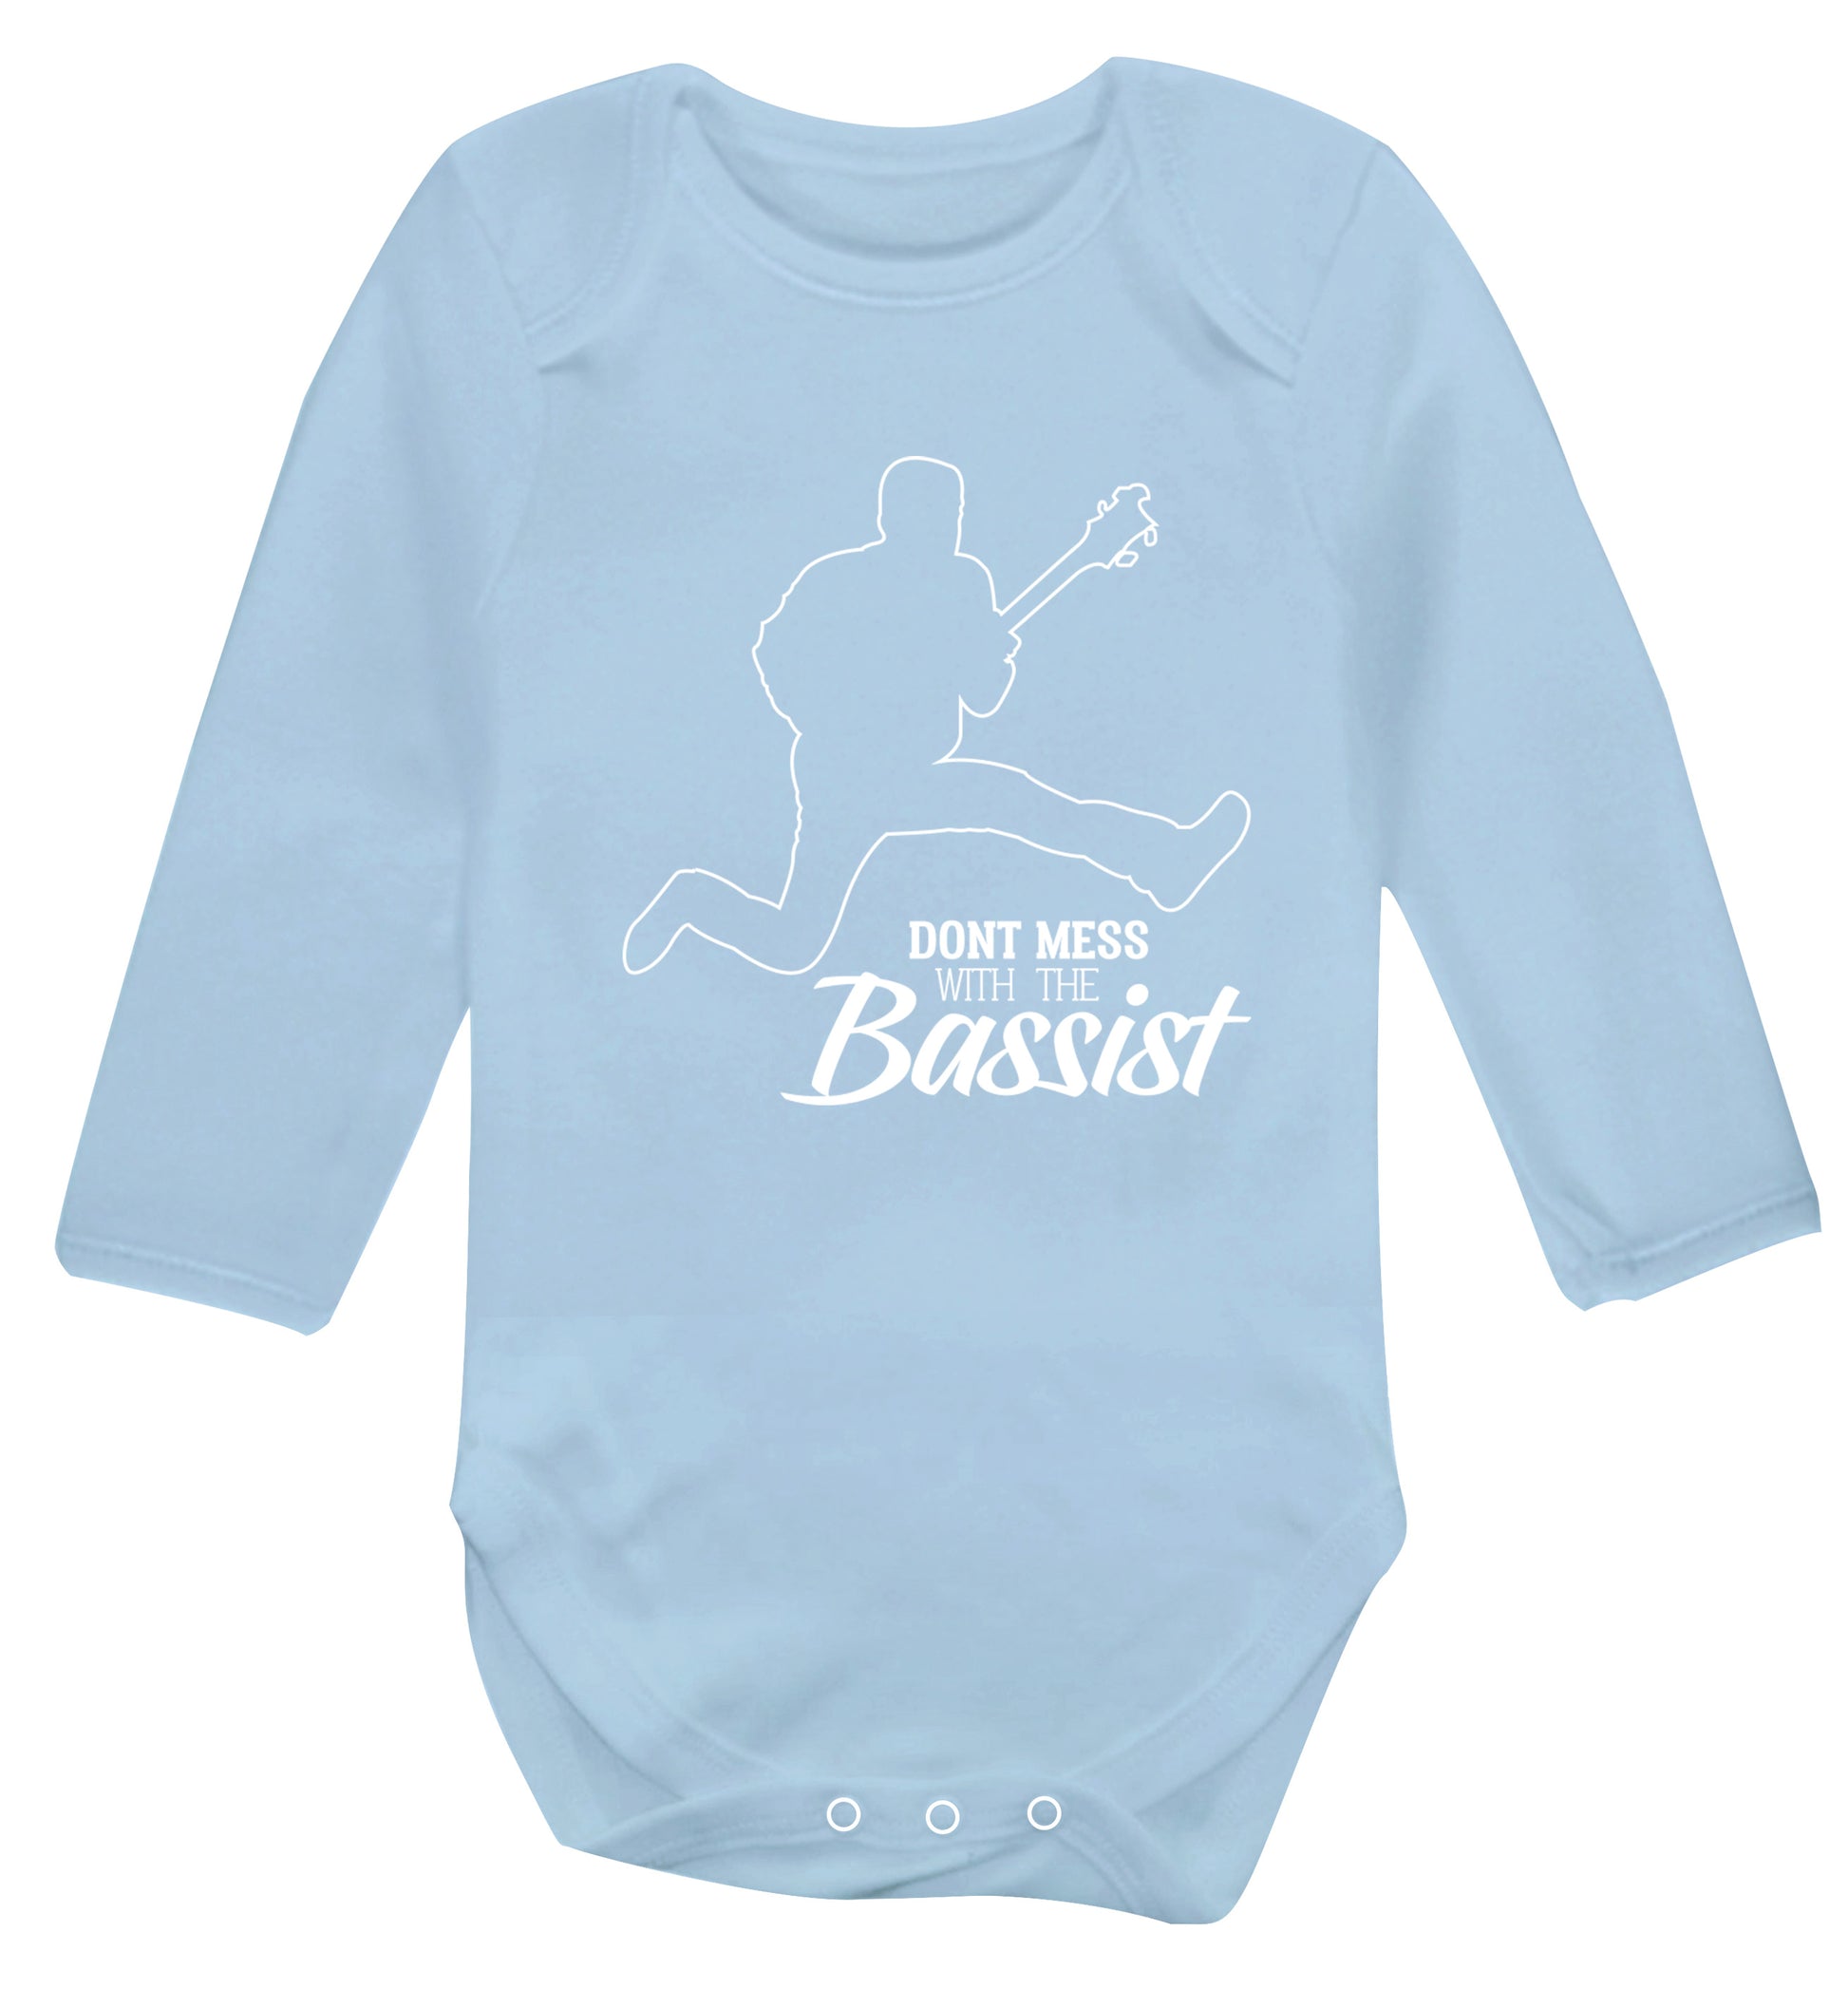 Dont mess with the bassist Baby Vest long sleeved pale blue 6-12 months